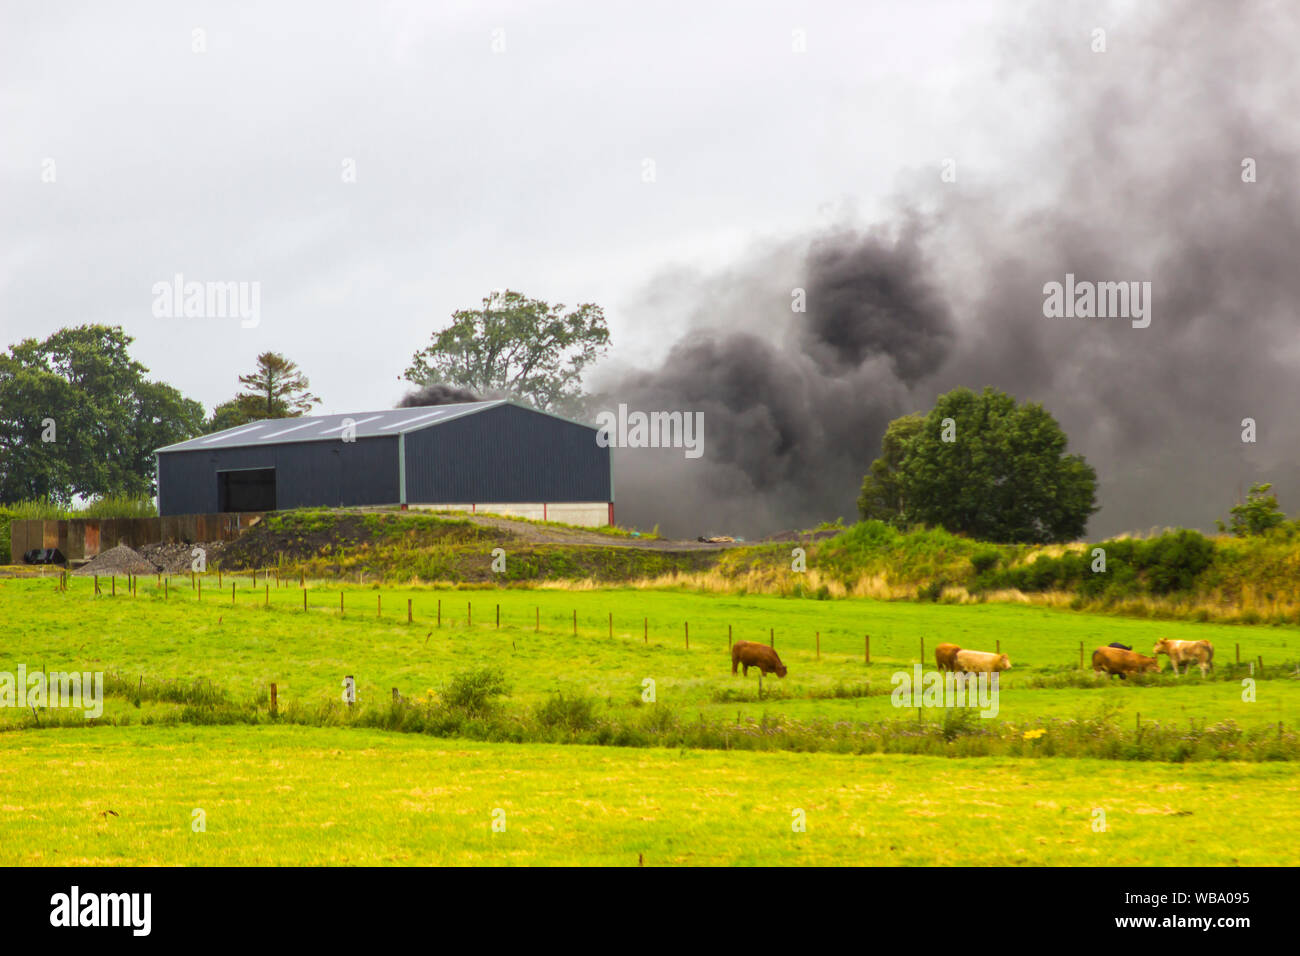 Thick black acrid smoke from a farm fire causing pollution to the environment in County Tyrone in Northern Ireland on a wet summer day. This fire was Stock Photo